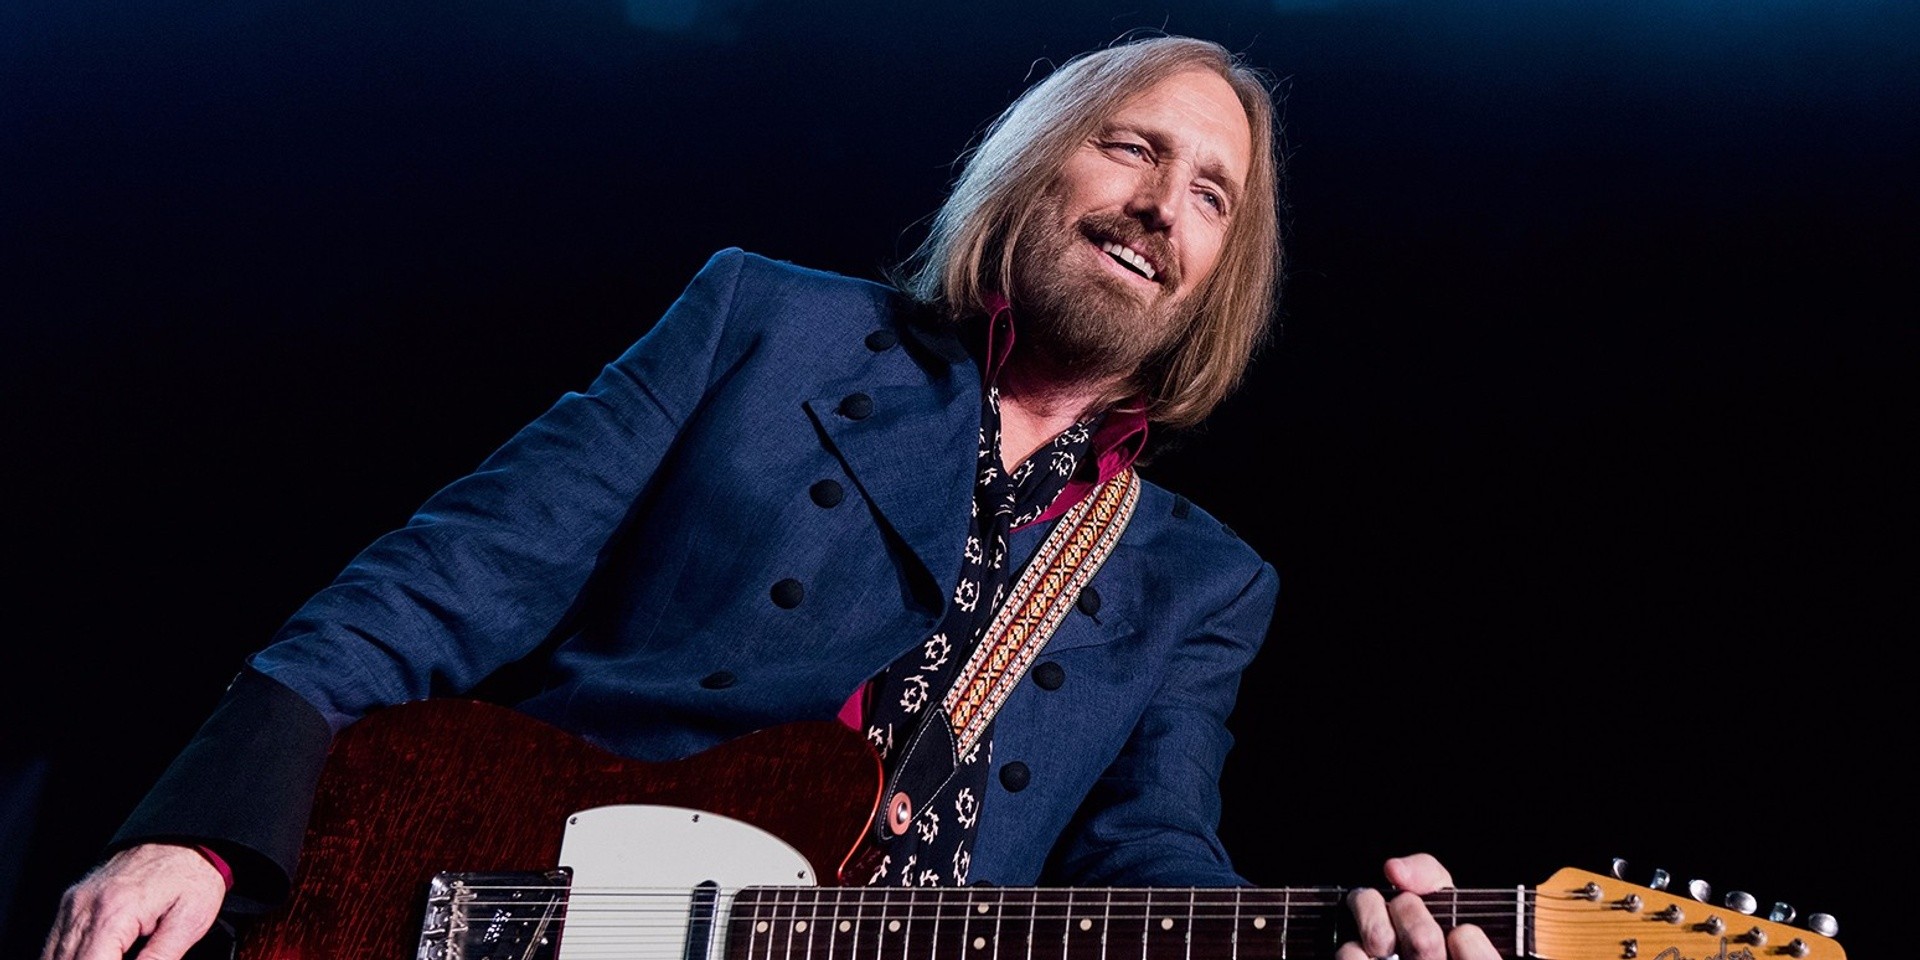 Rock icon Tom Petty has passed away at 66